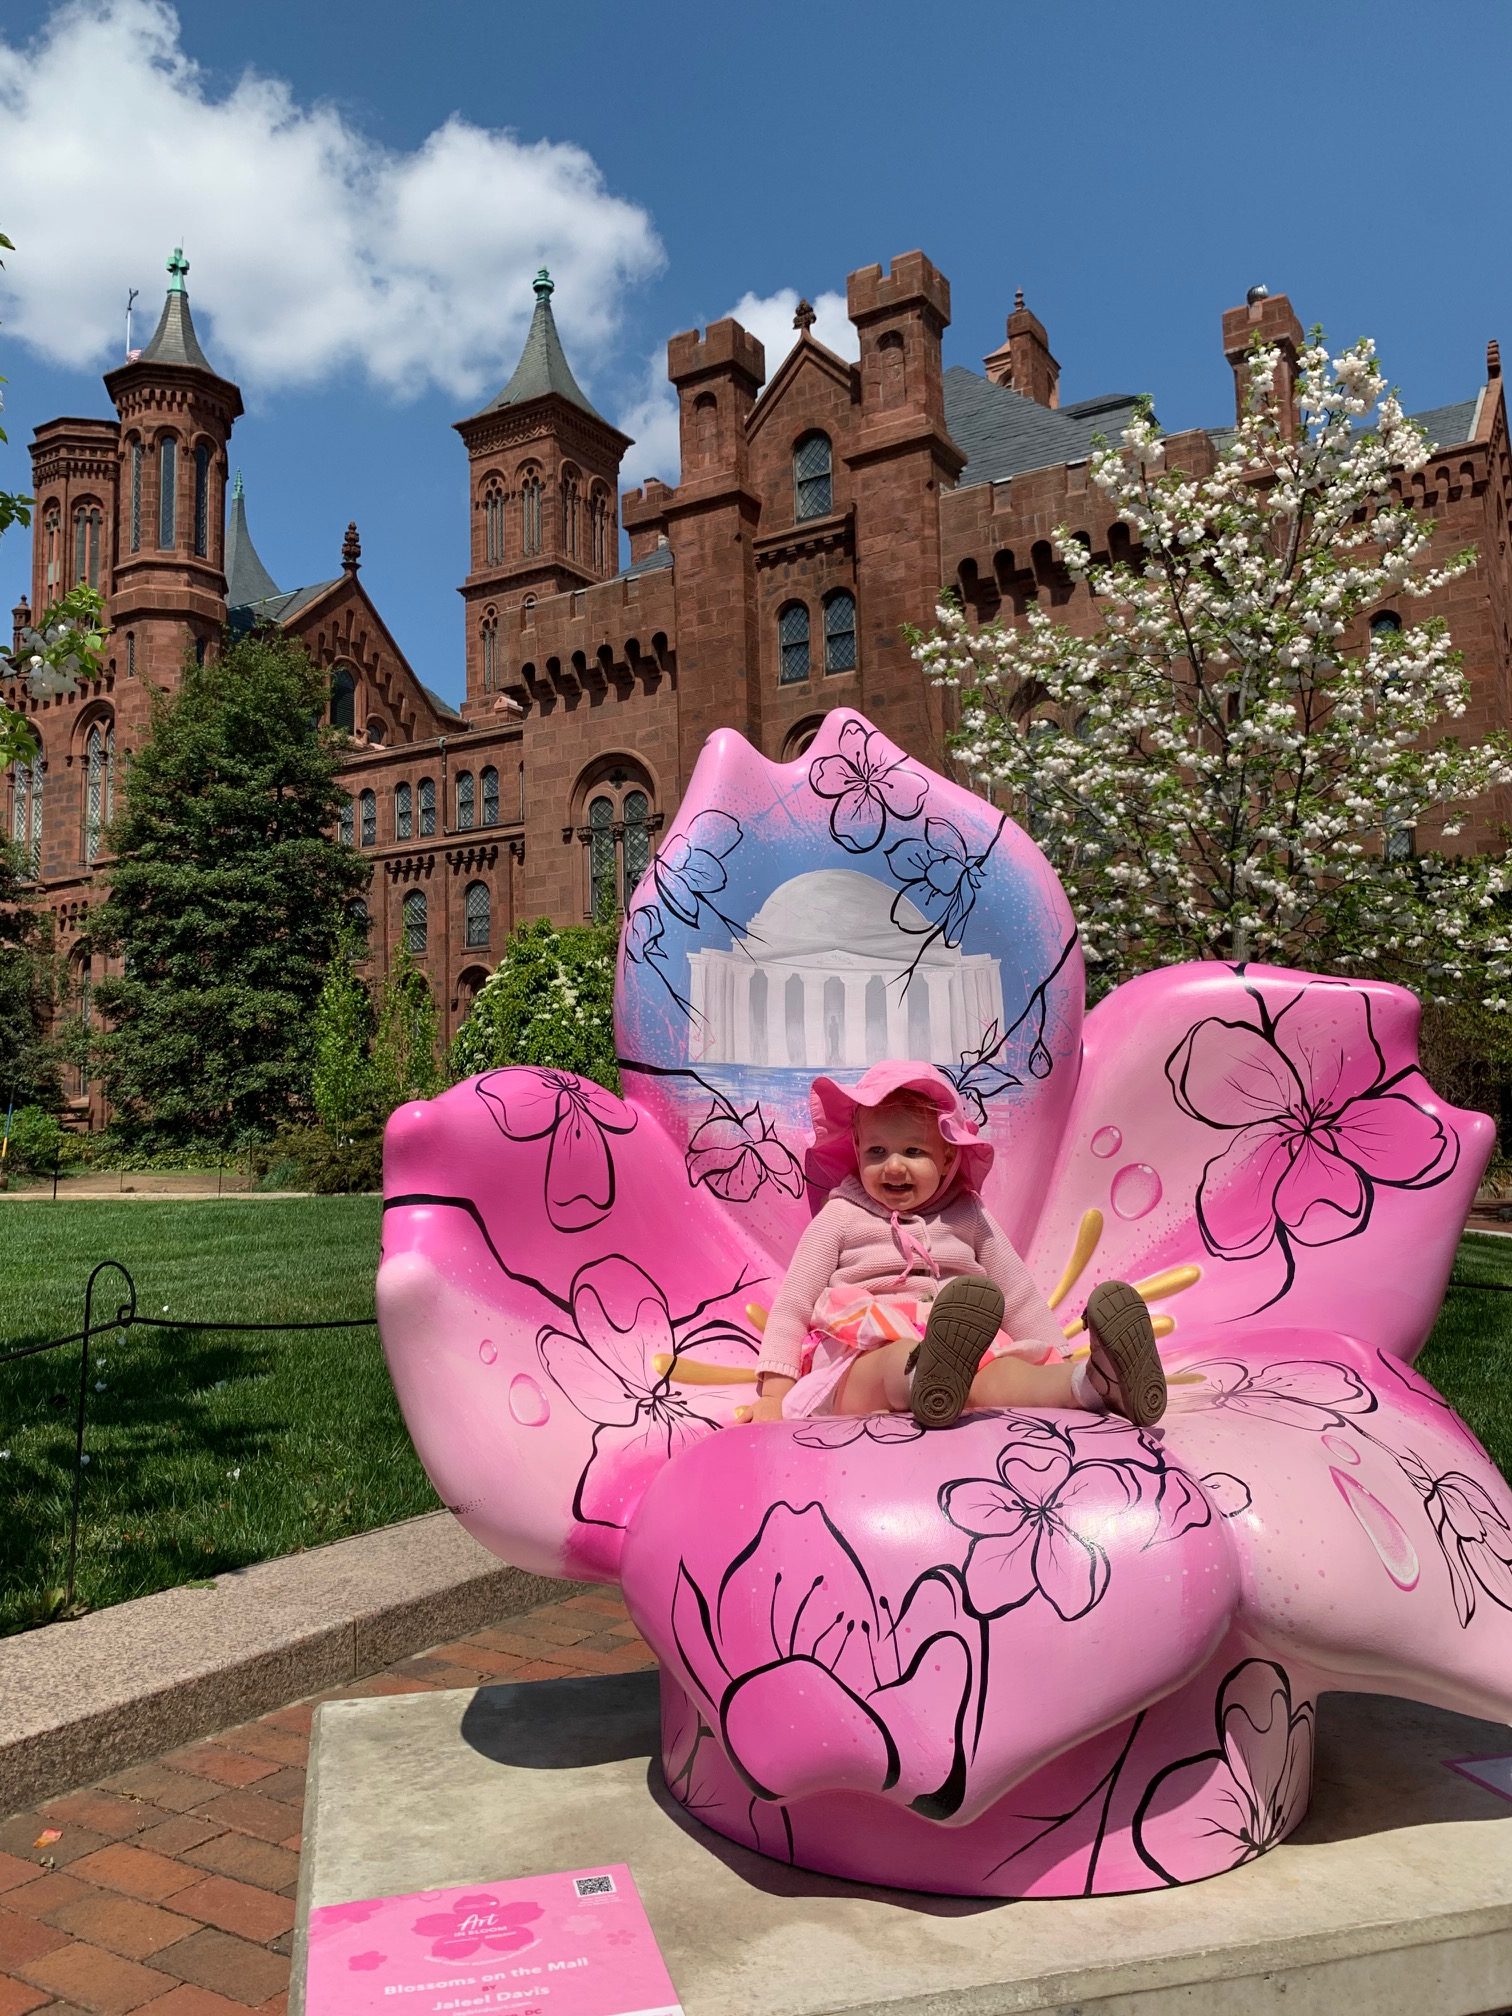 101 to do with kids in the Washington, DC area Smithsonian castle